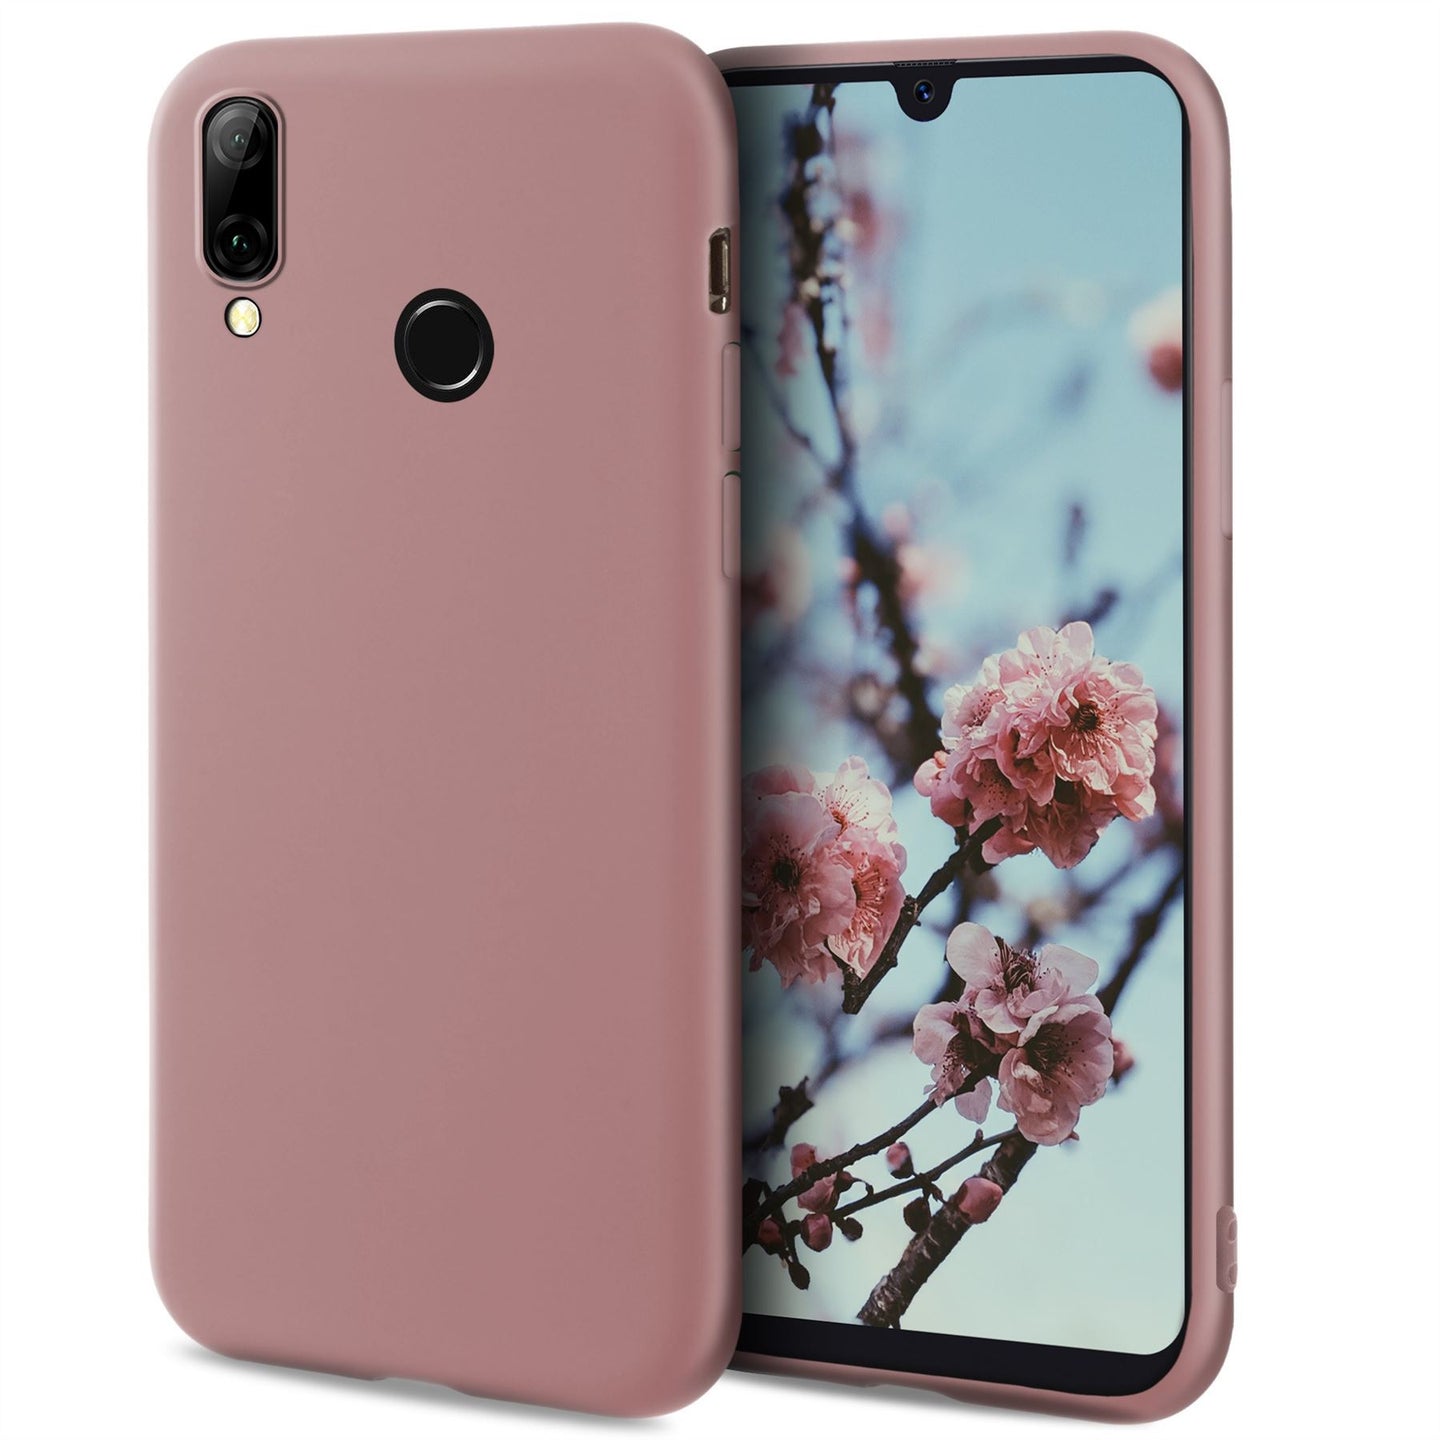 Moozy Minimalist Series Silicone Case for Huawei P Smart 2019 and Honor 10 Lite, Rose Beige - Matte Finish Slim Soft TPU Cover